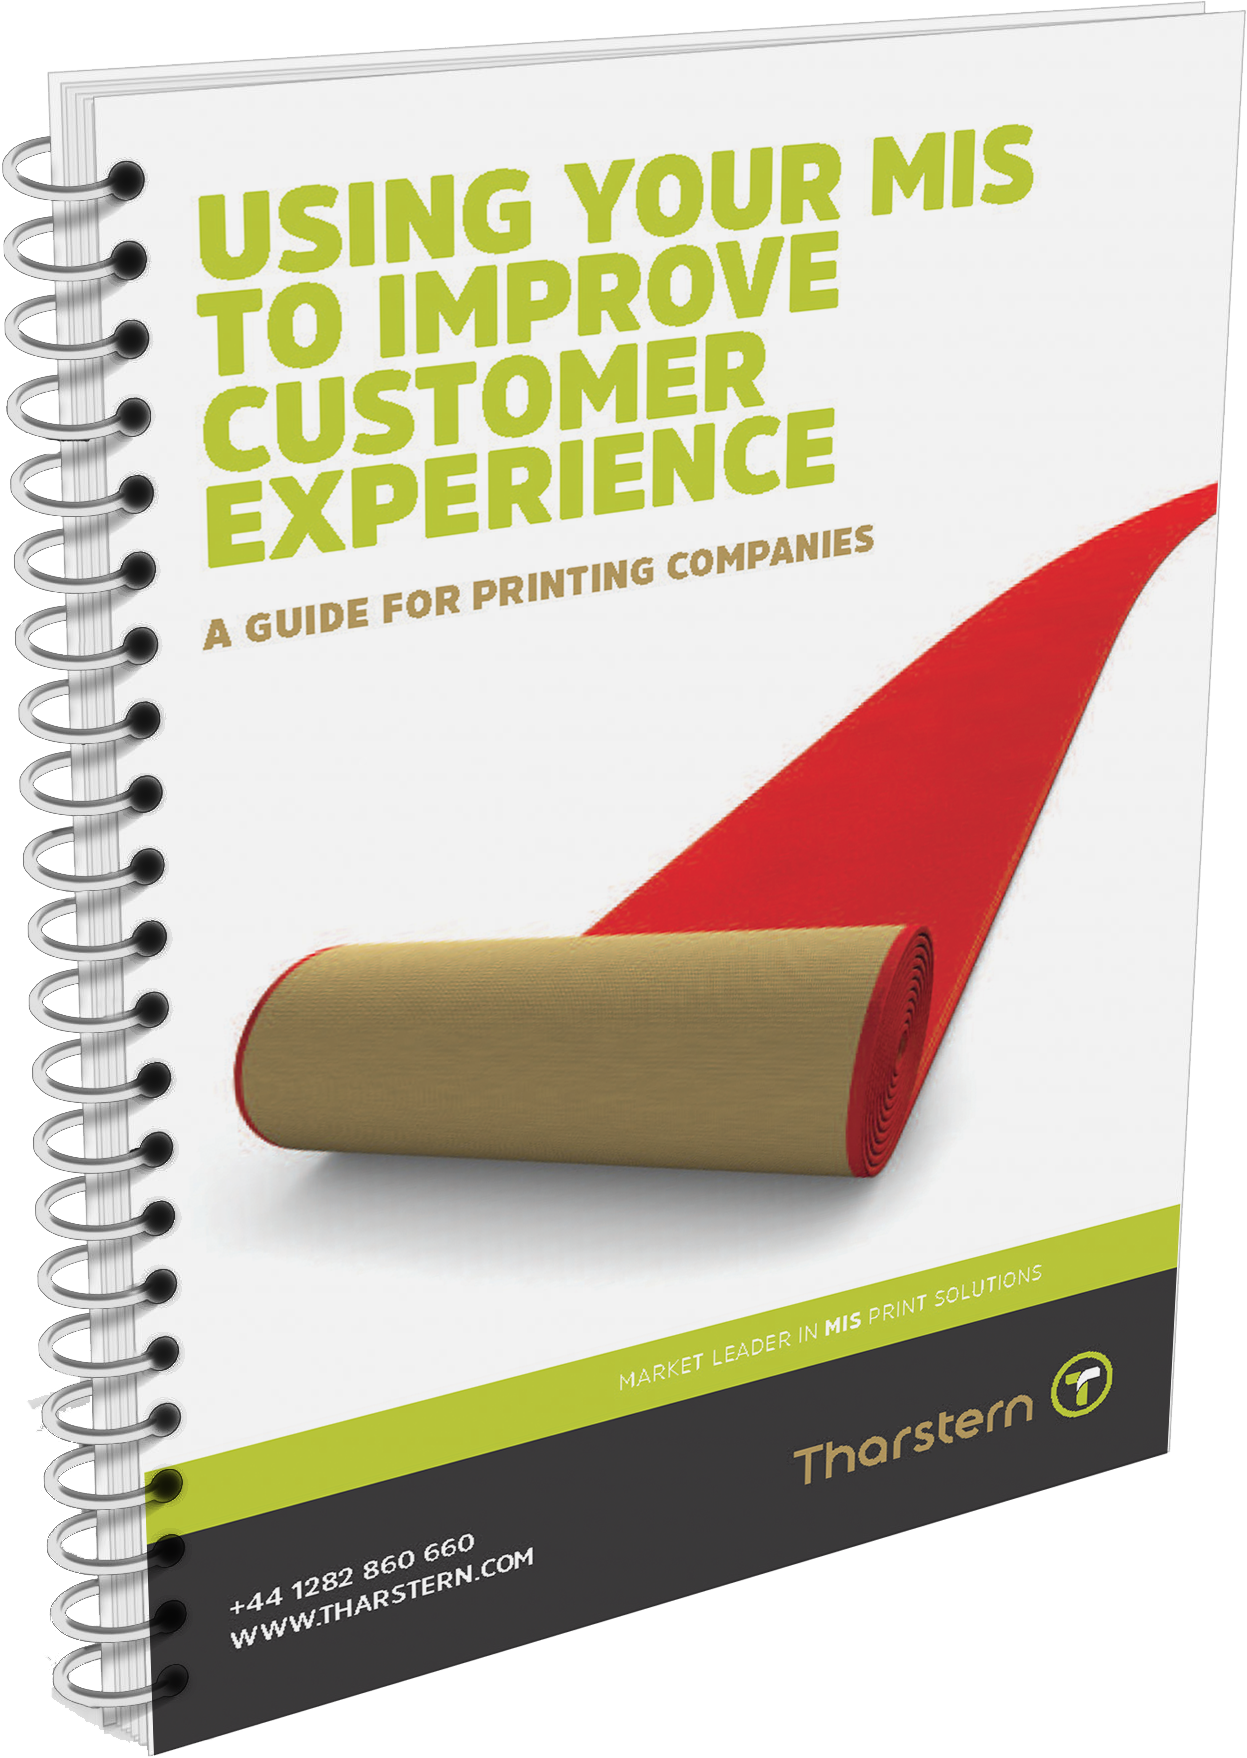 Using your MIS to Improve CX